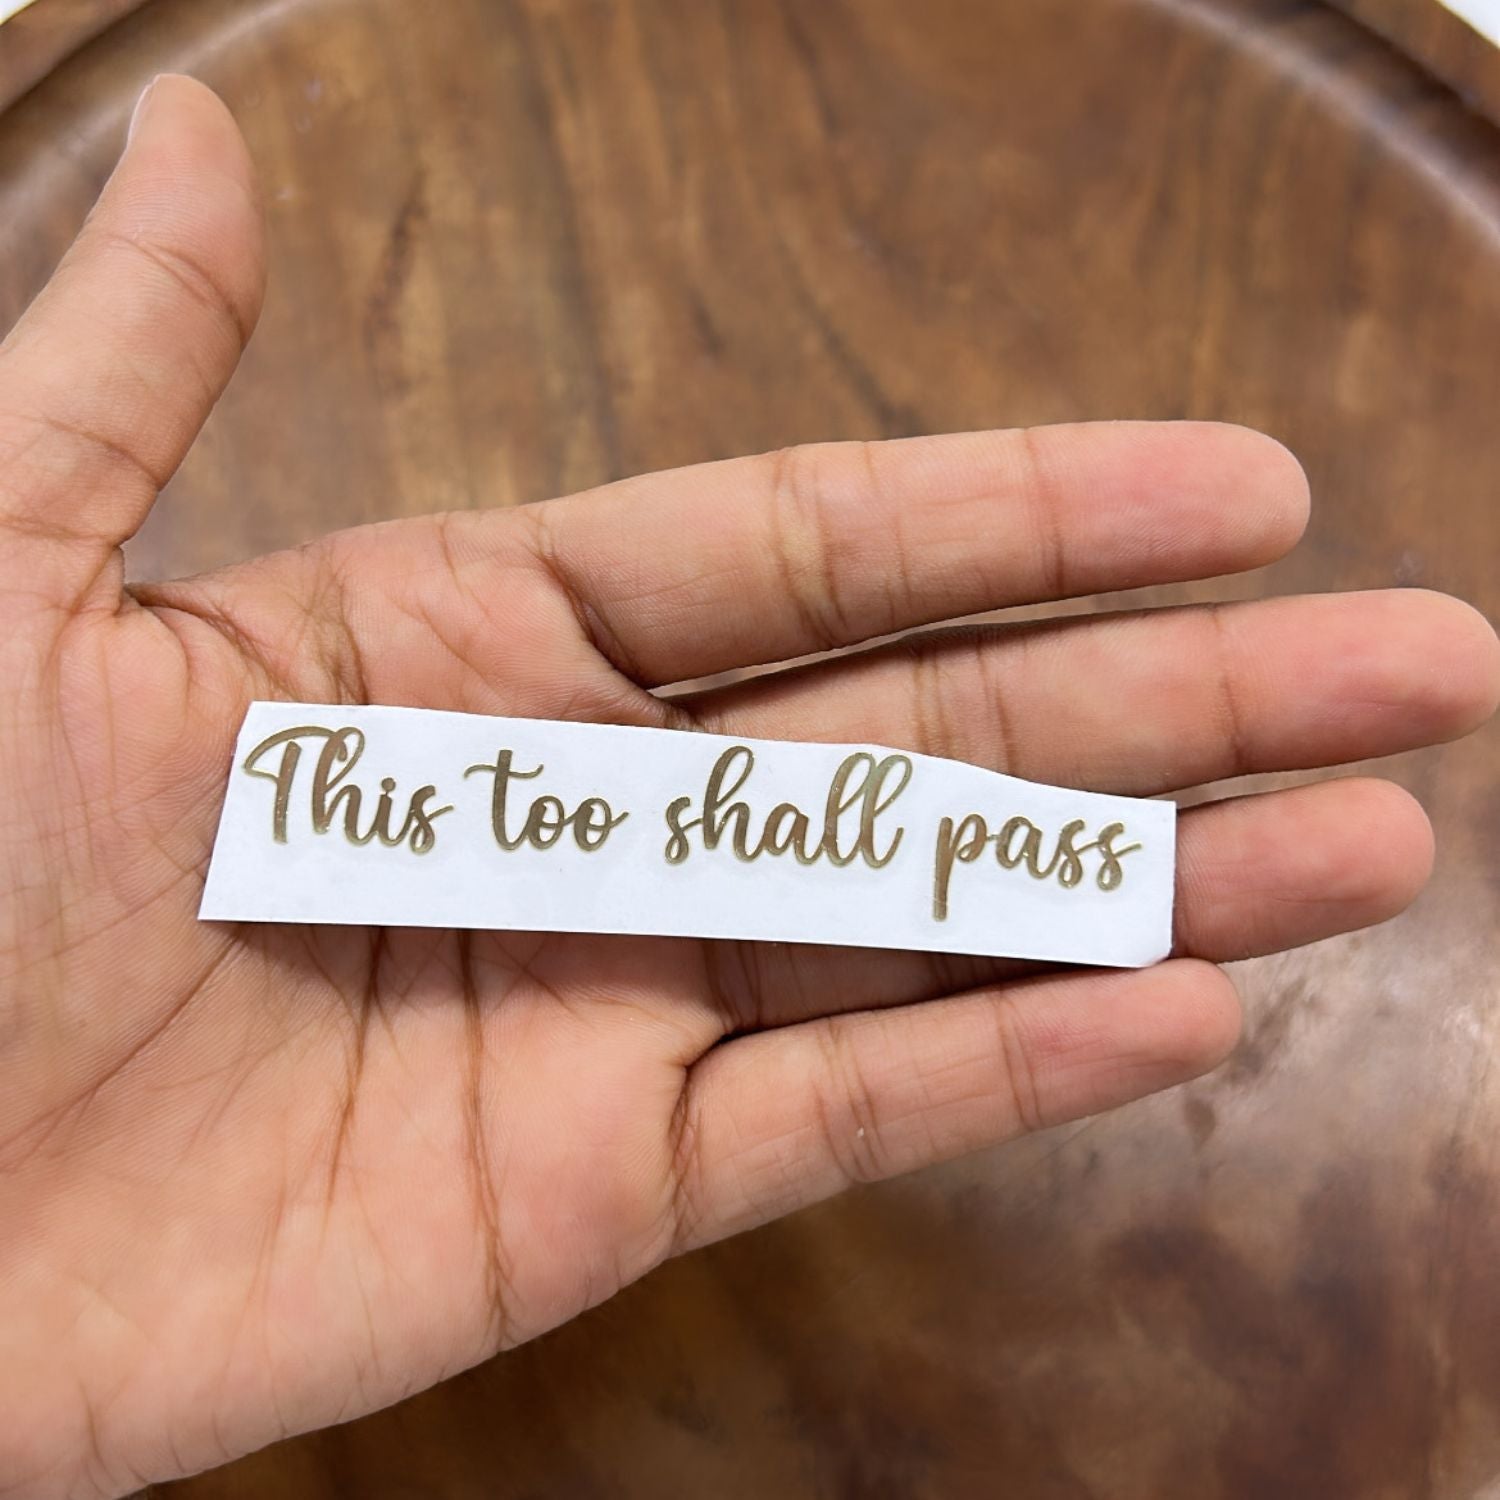 METAL STICKER- THIS TOO SHALL PASS